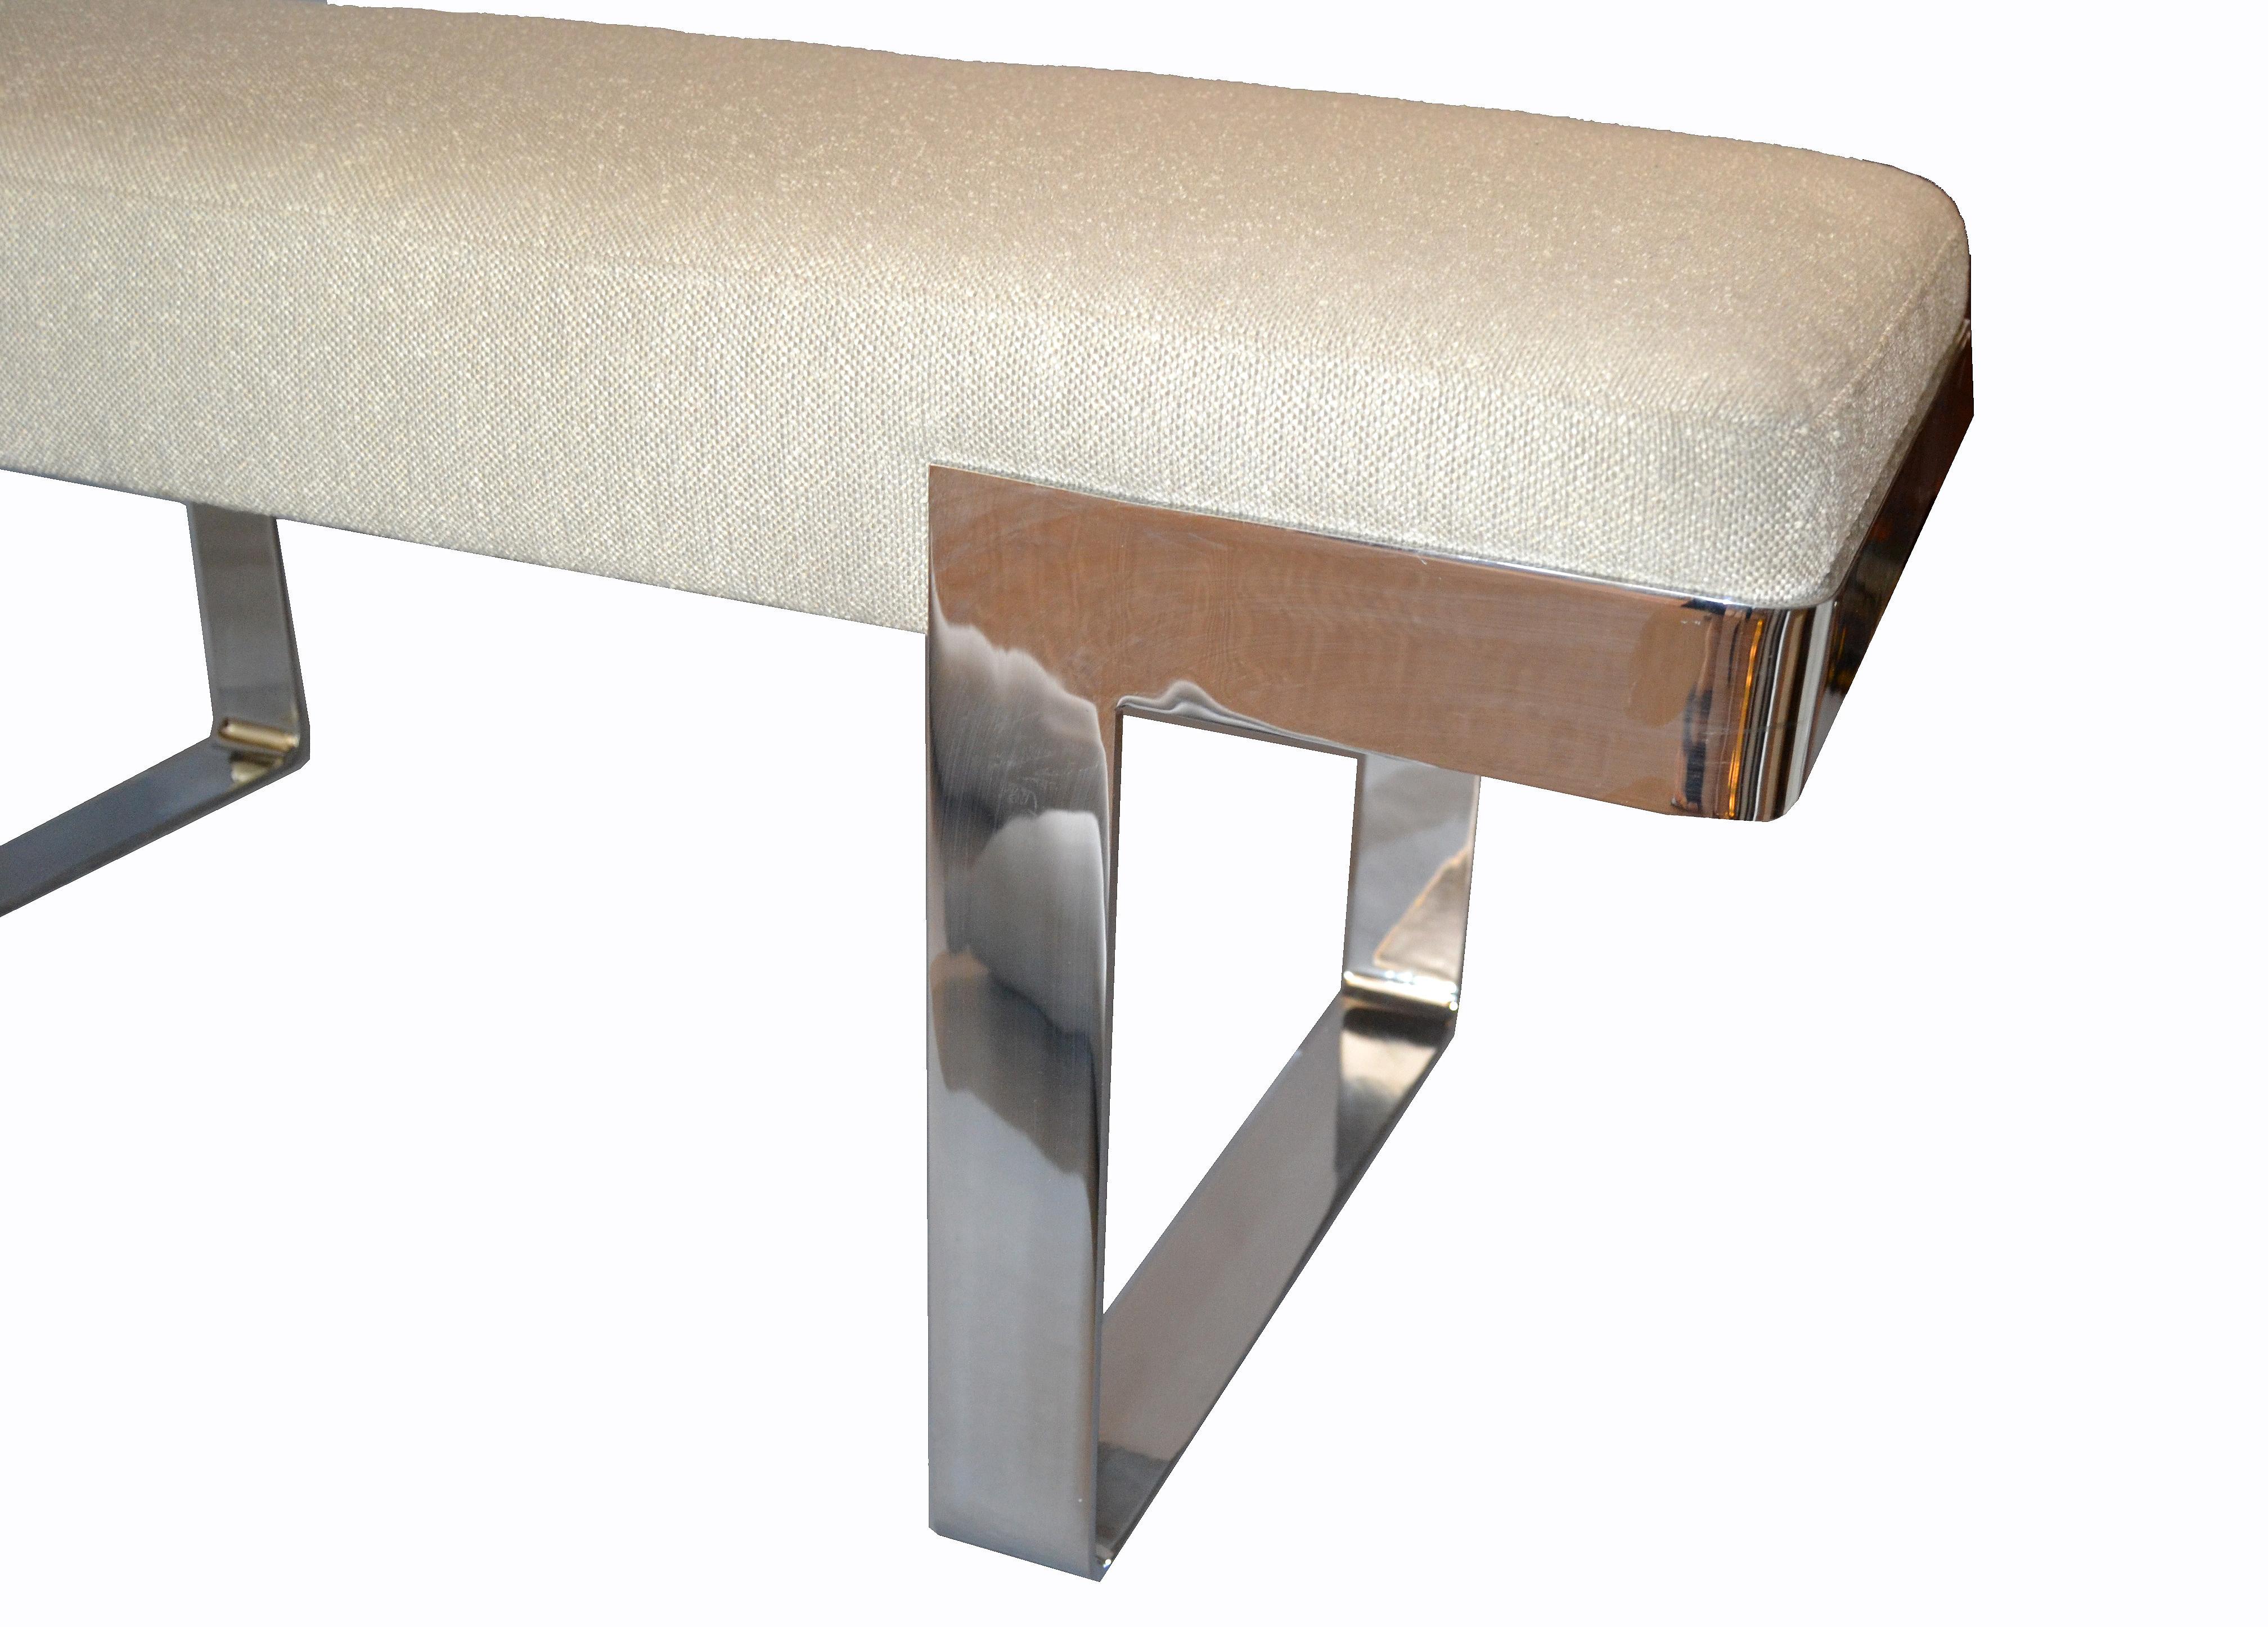 1 of 2 Milo Baughman Benches Linen Fabric in Beige on Steel Base Pace Collection 2